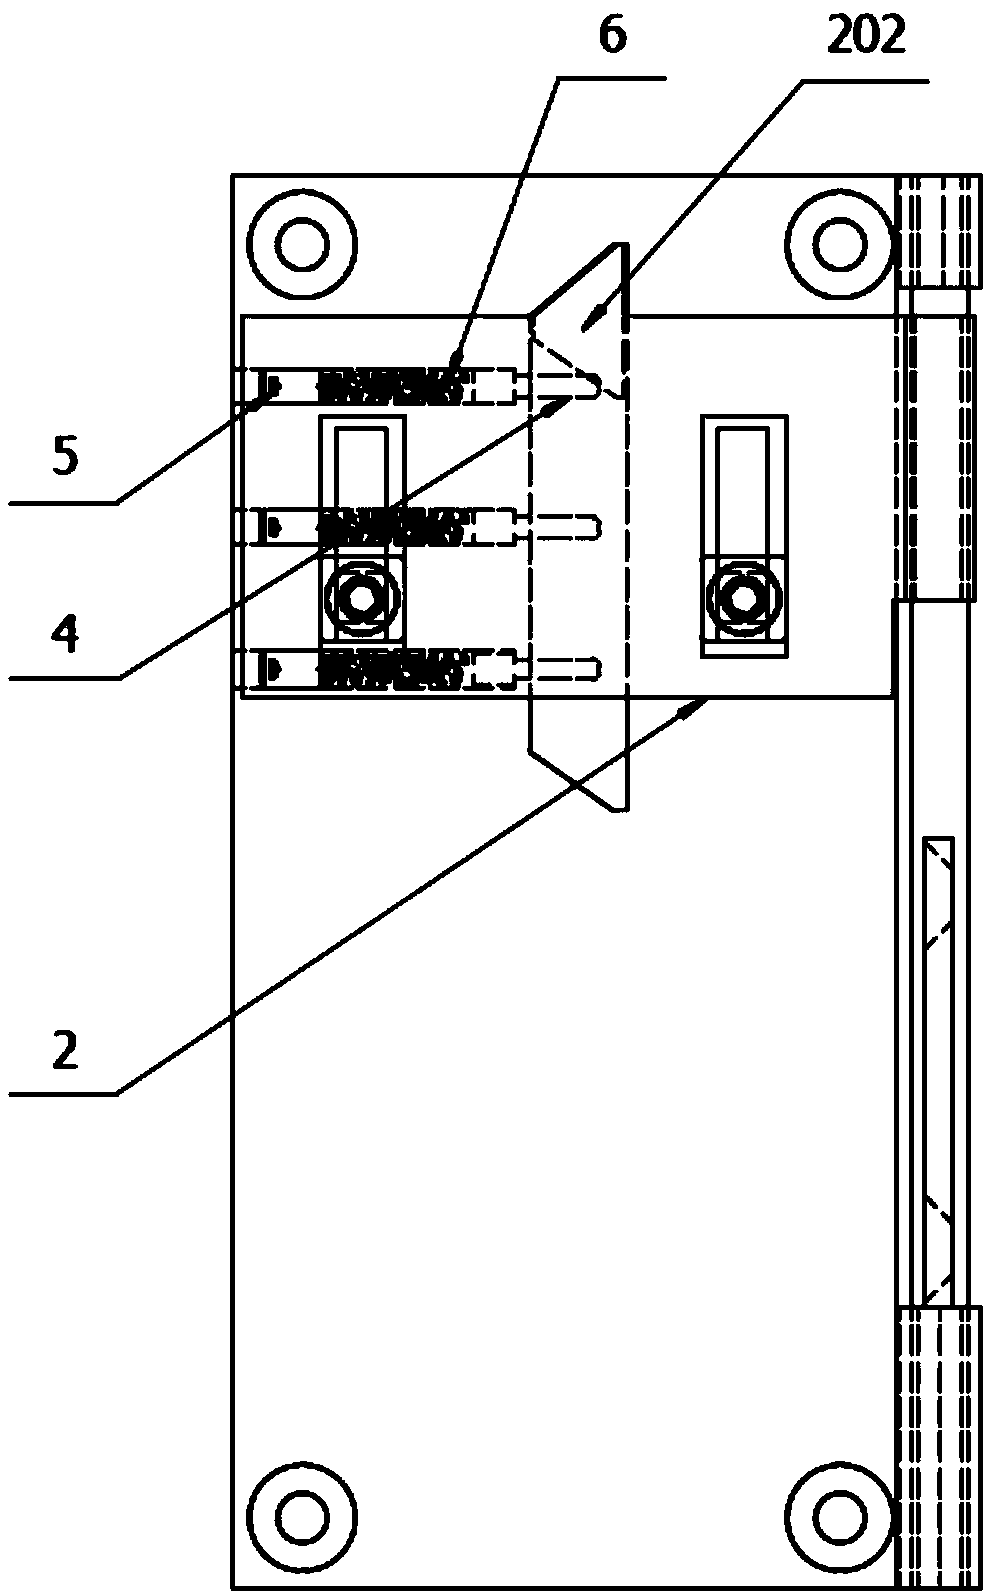 Multi-pose stop control hinge lock and door provided with same